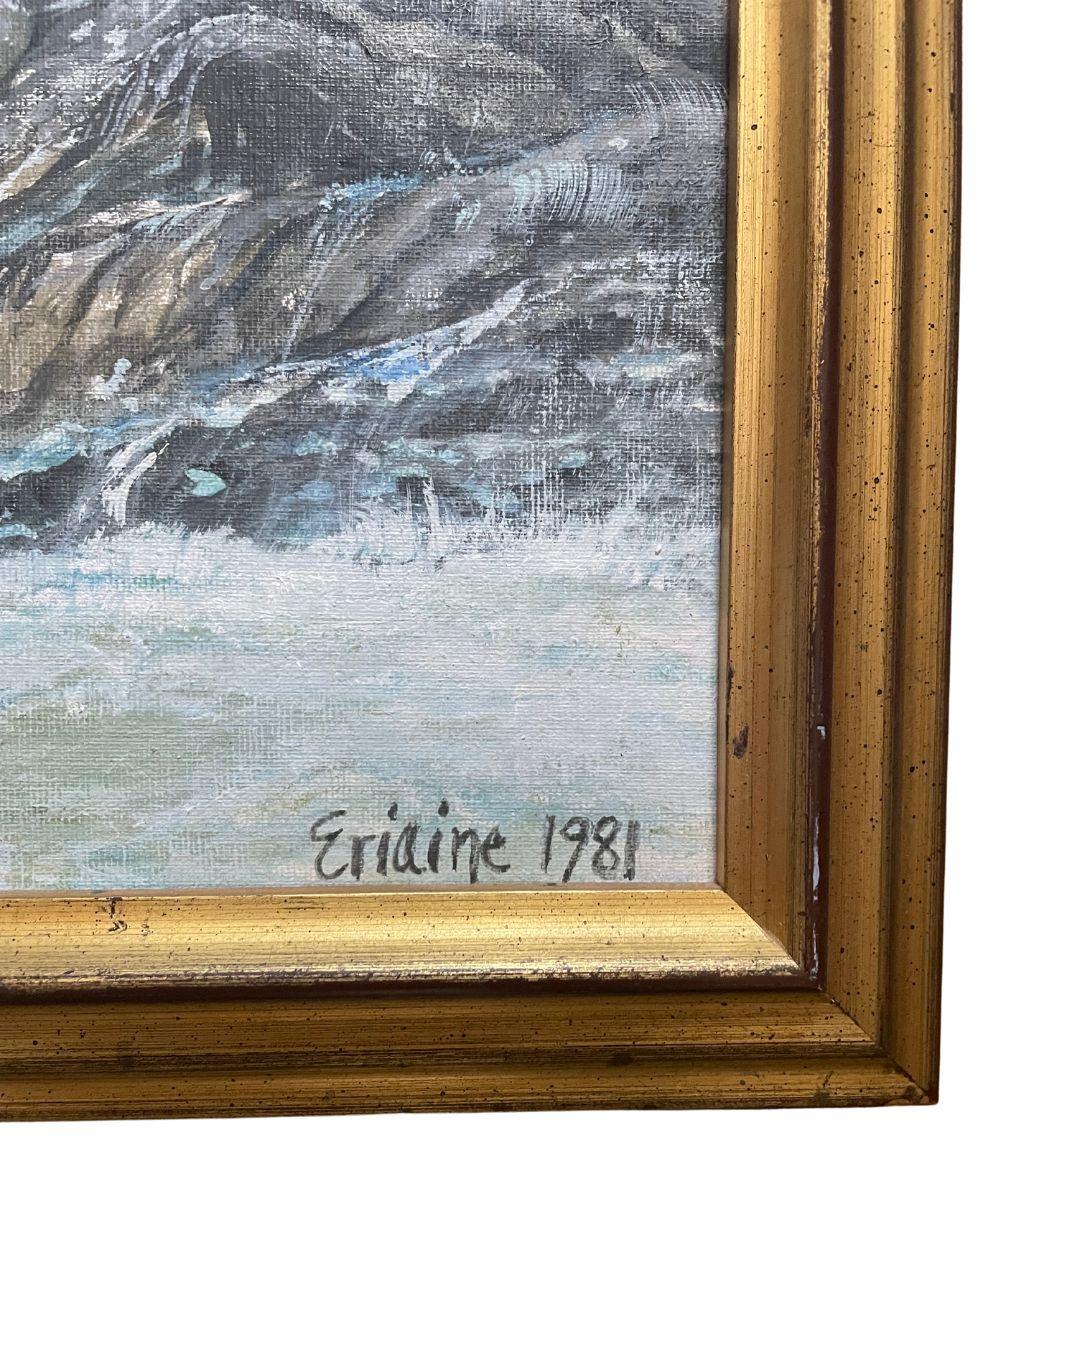 Vintage seascape acrylic painting in giltwood frame. Signed and dated at lower left: Eriaine 1981; Inscribed in Danish at the back. A loose translation of the title: 